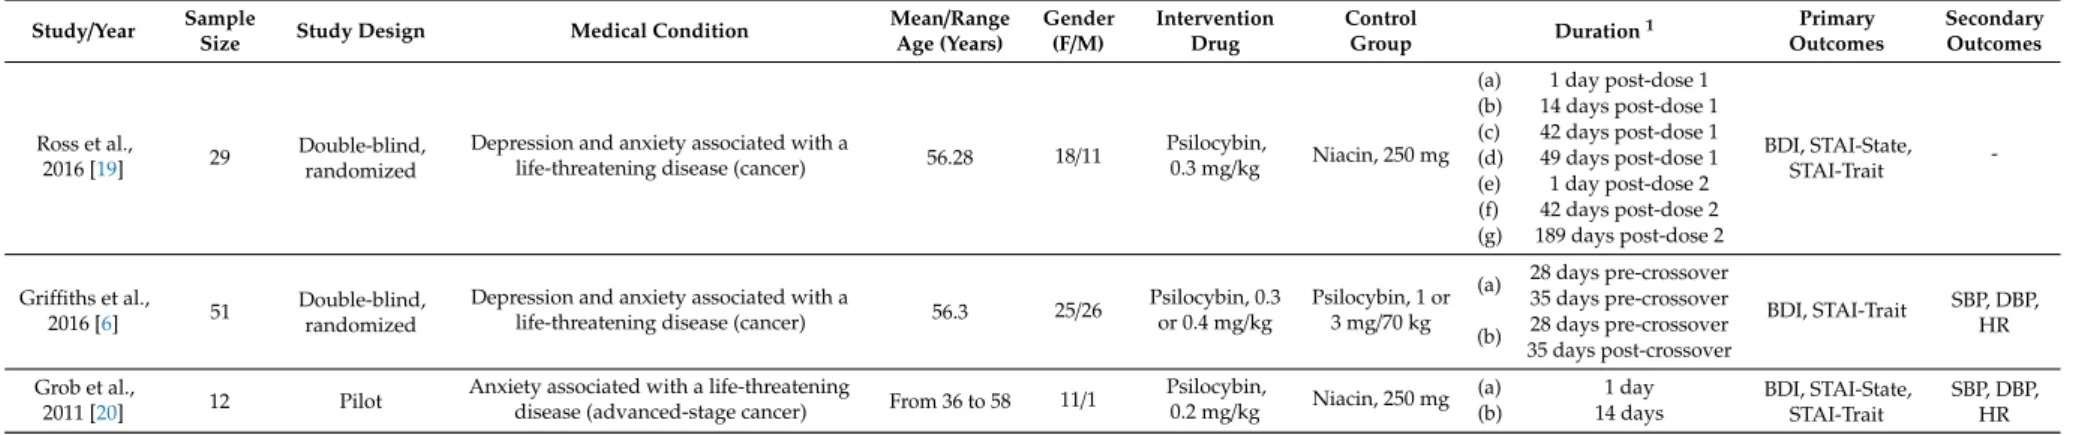 Table 1. Characteristics of the included studies in this systematic review with meta-analysis.